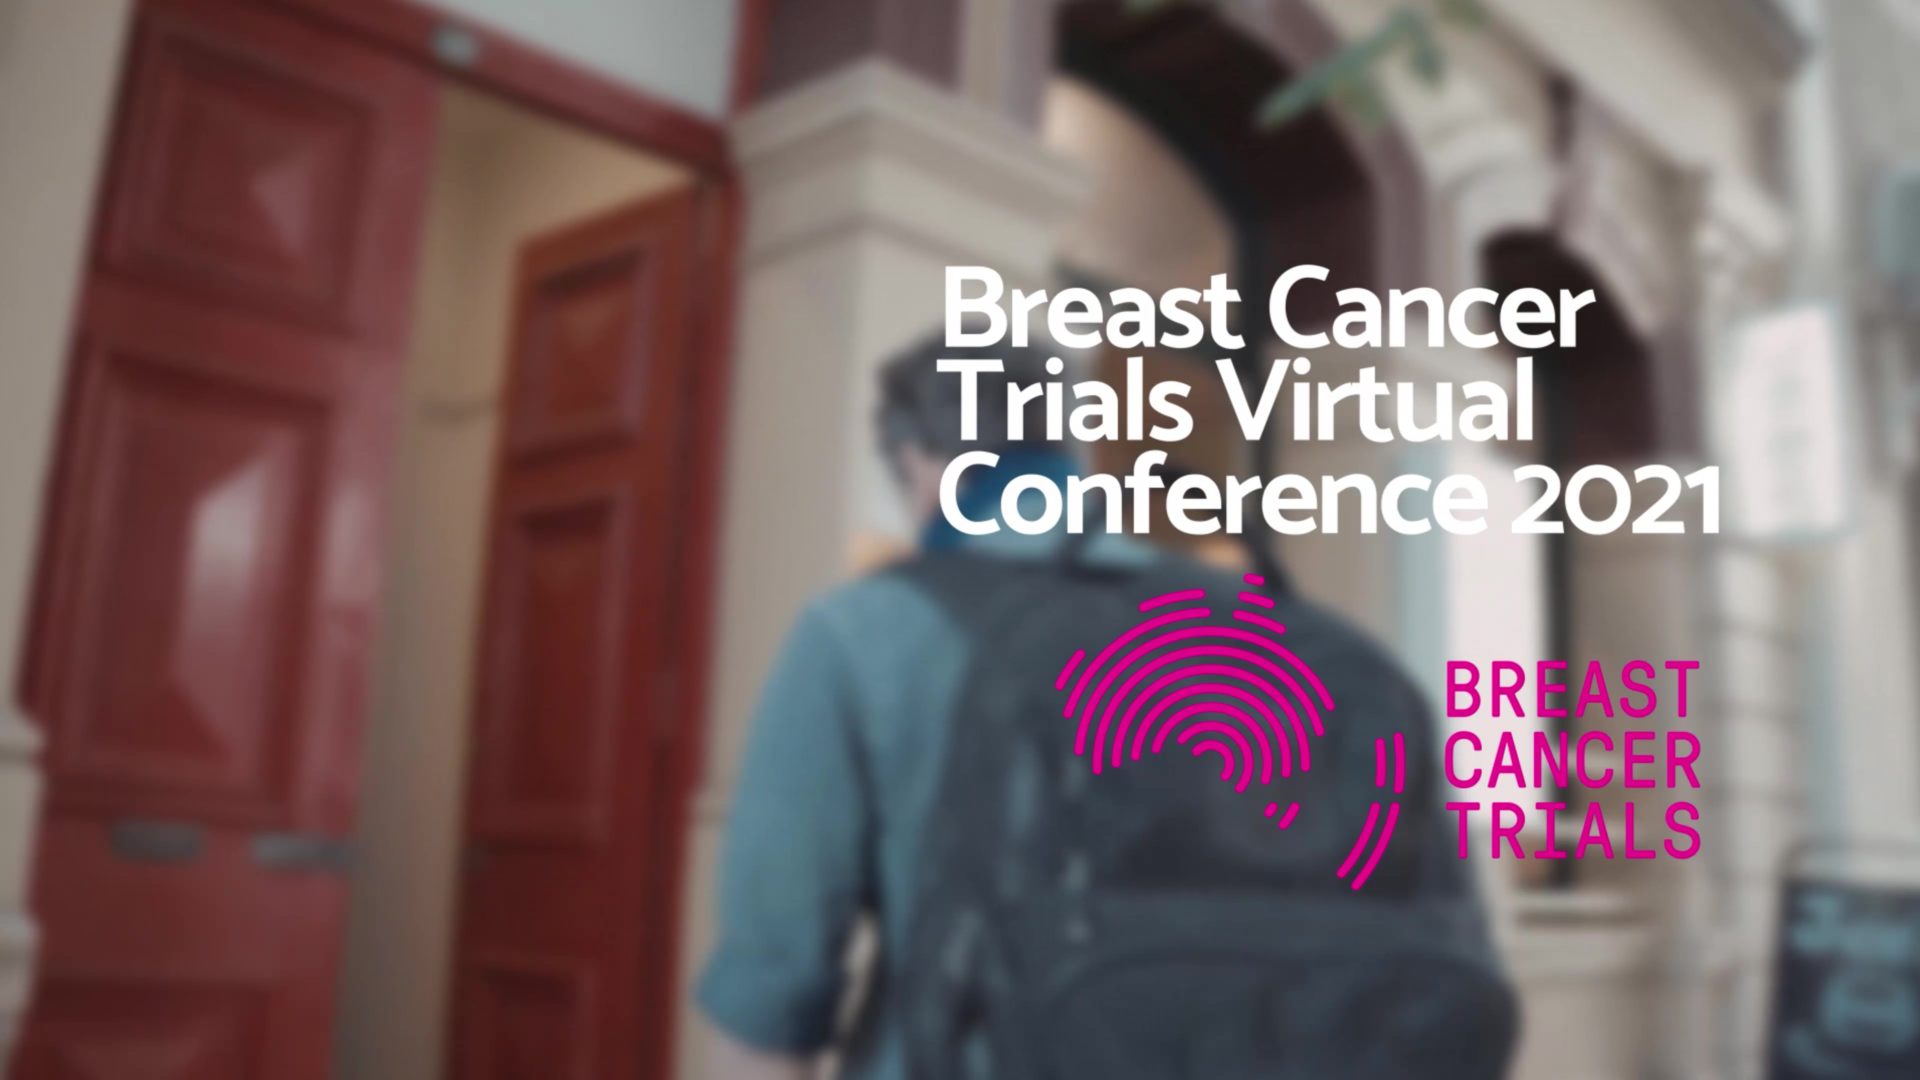 Breast Cancer Trials Virtual Conference 2021 snapshot